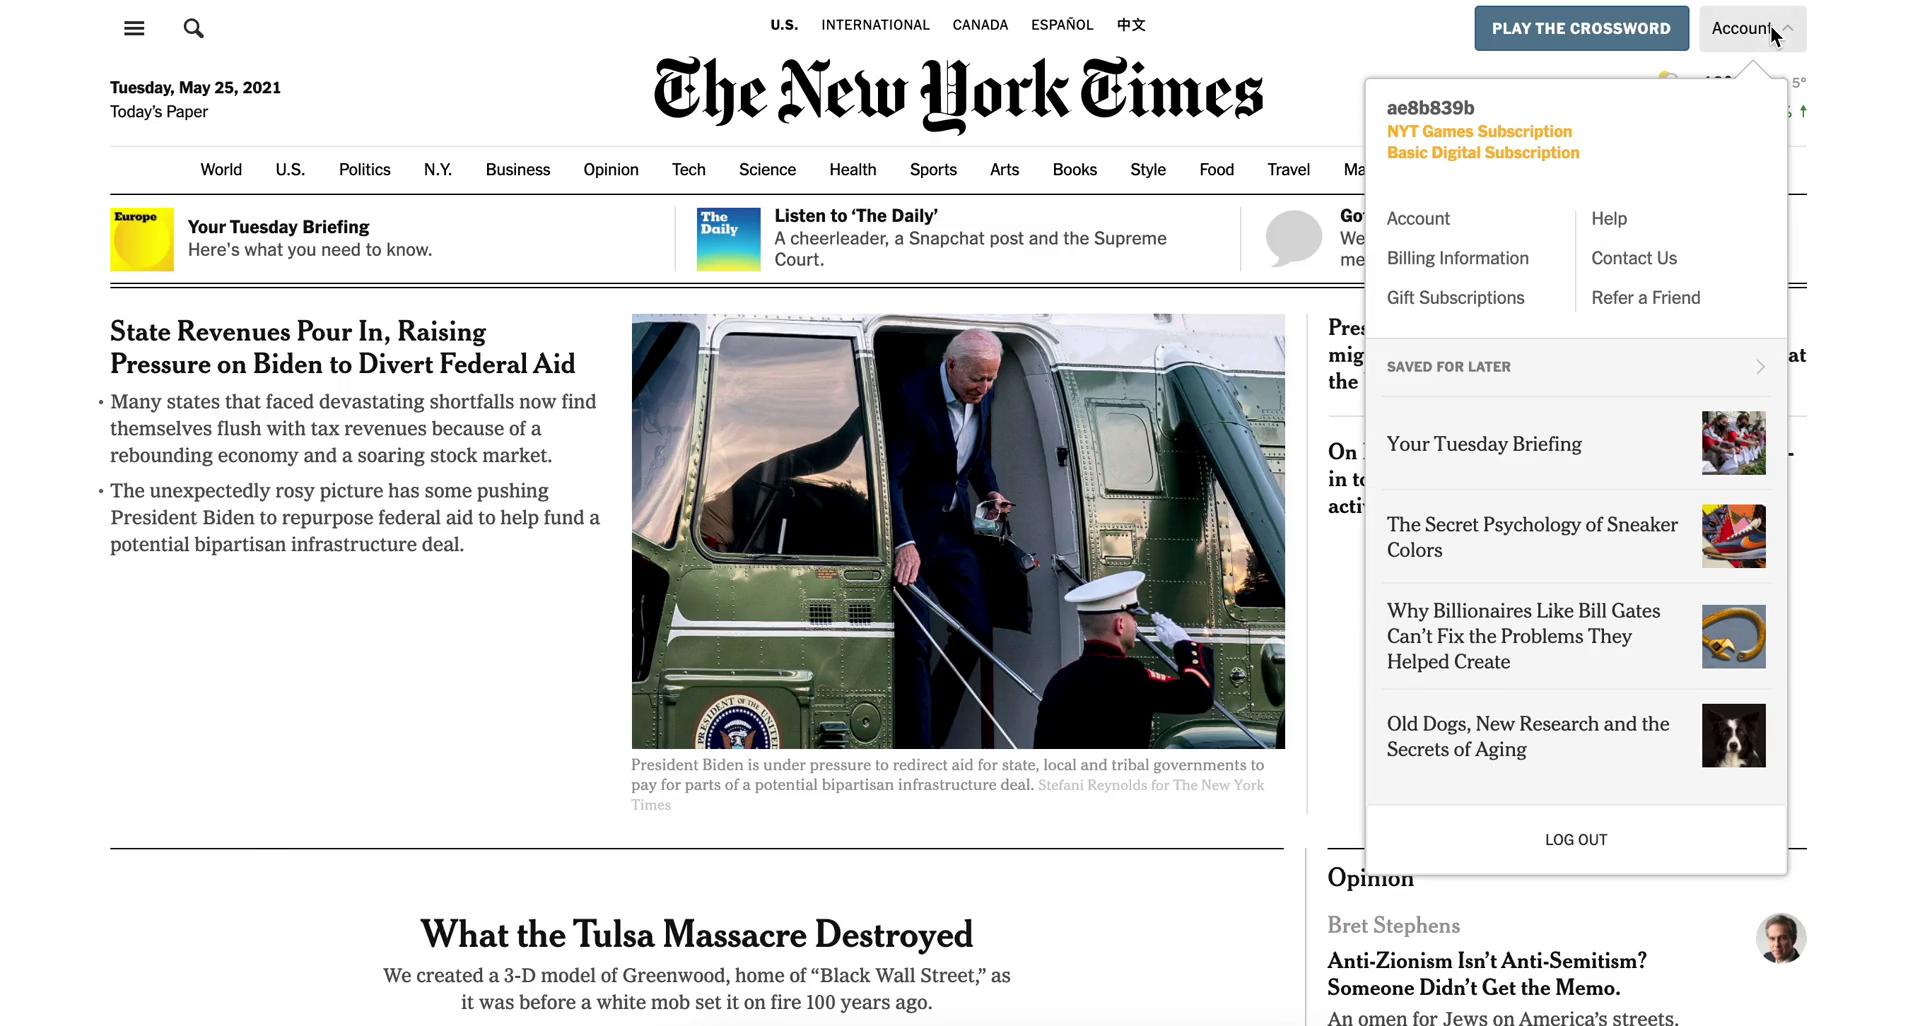 Screenshot of Account menu on Cancelling your subscription on The New York Times user flow